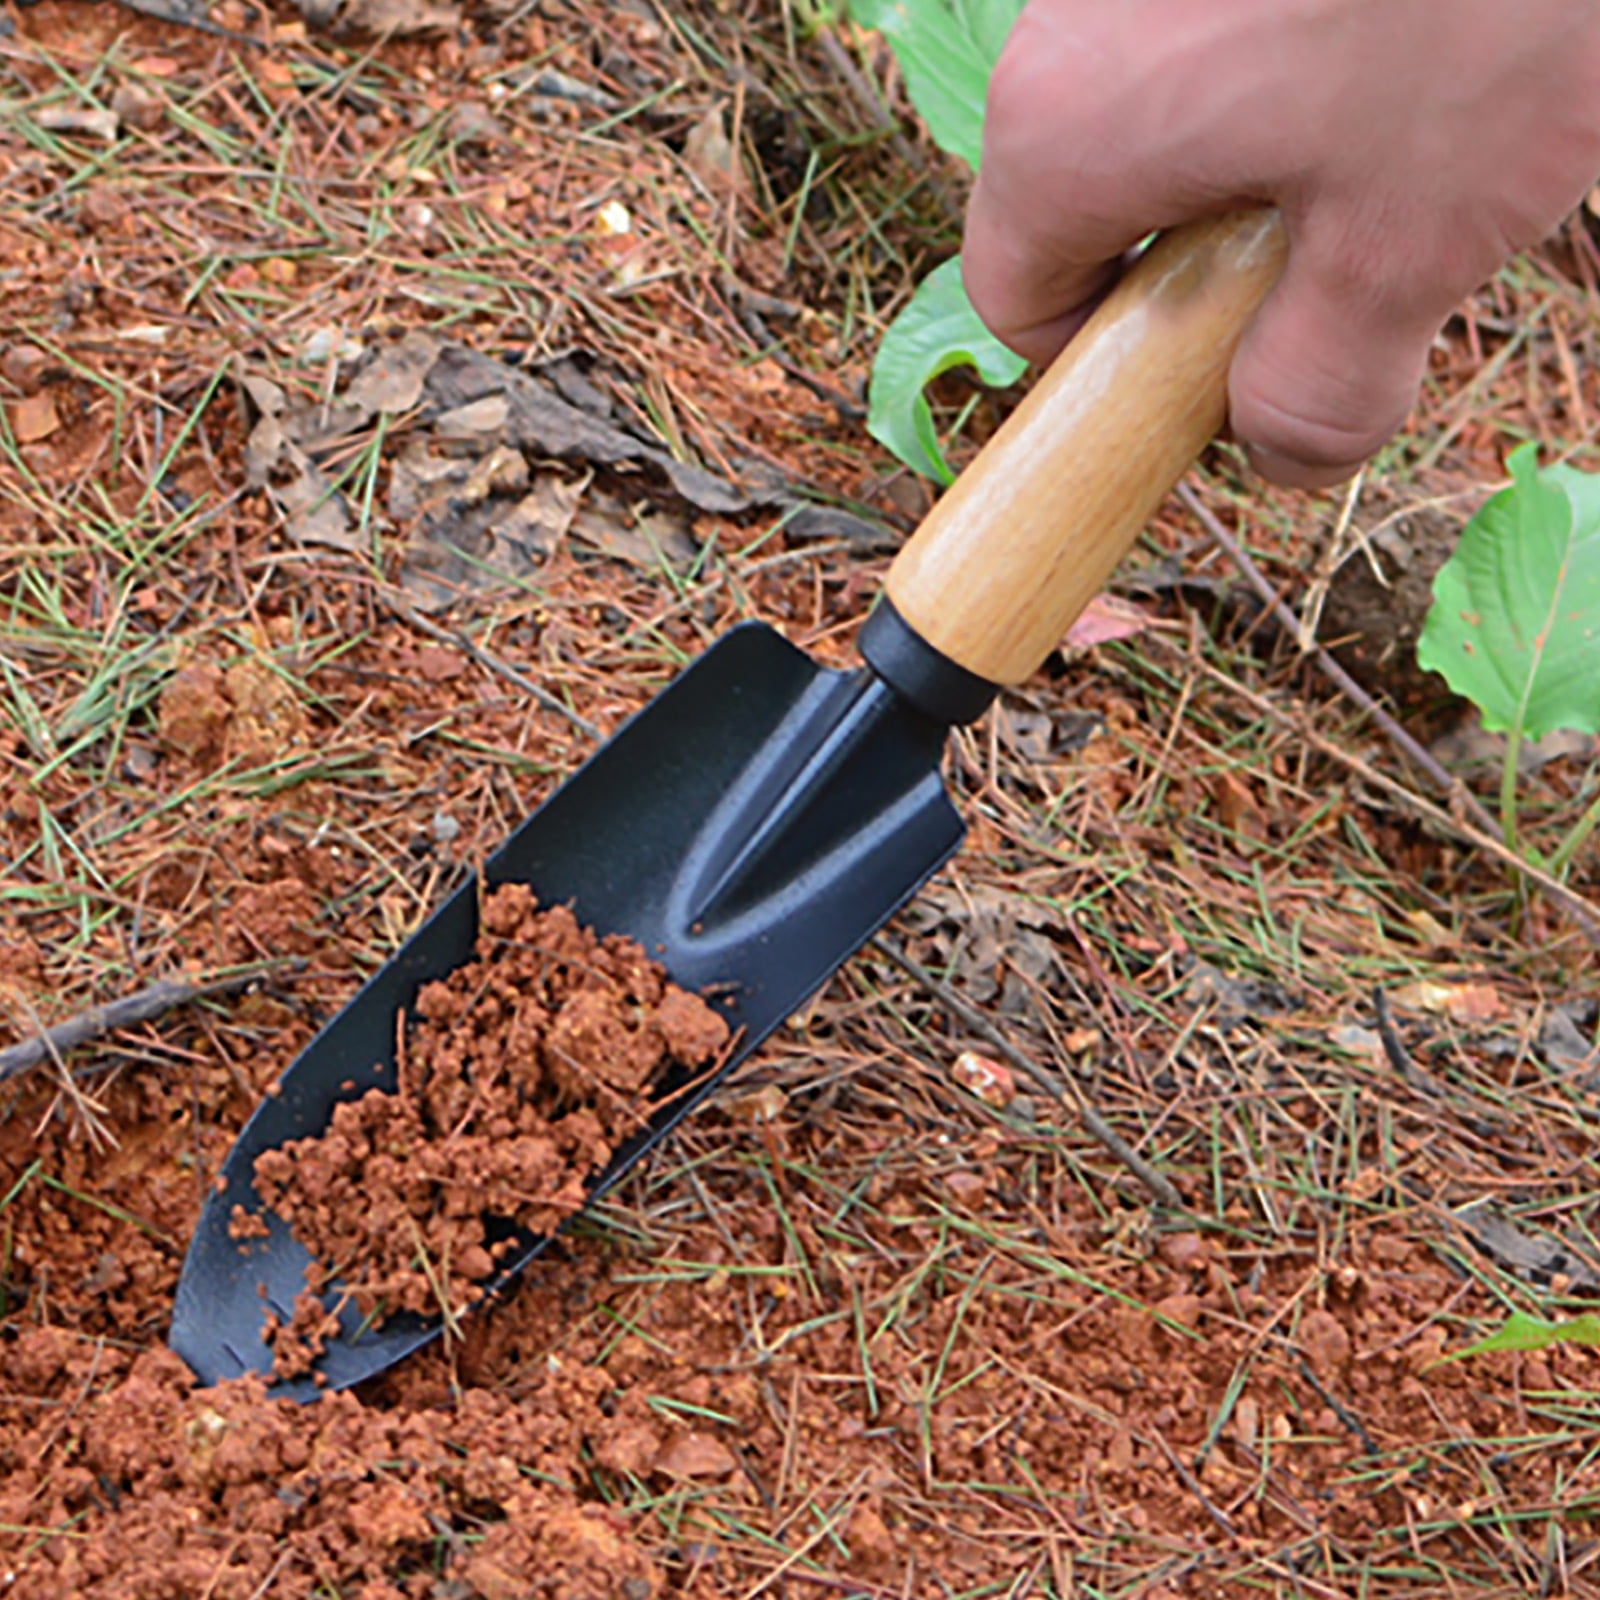 Details about   Stainless Steel Gardening Shovel Gardening Tool Home Plant Cultivation Shovel 